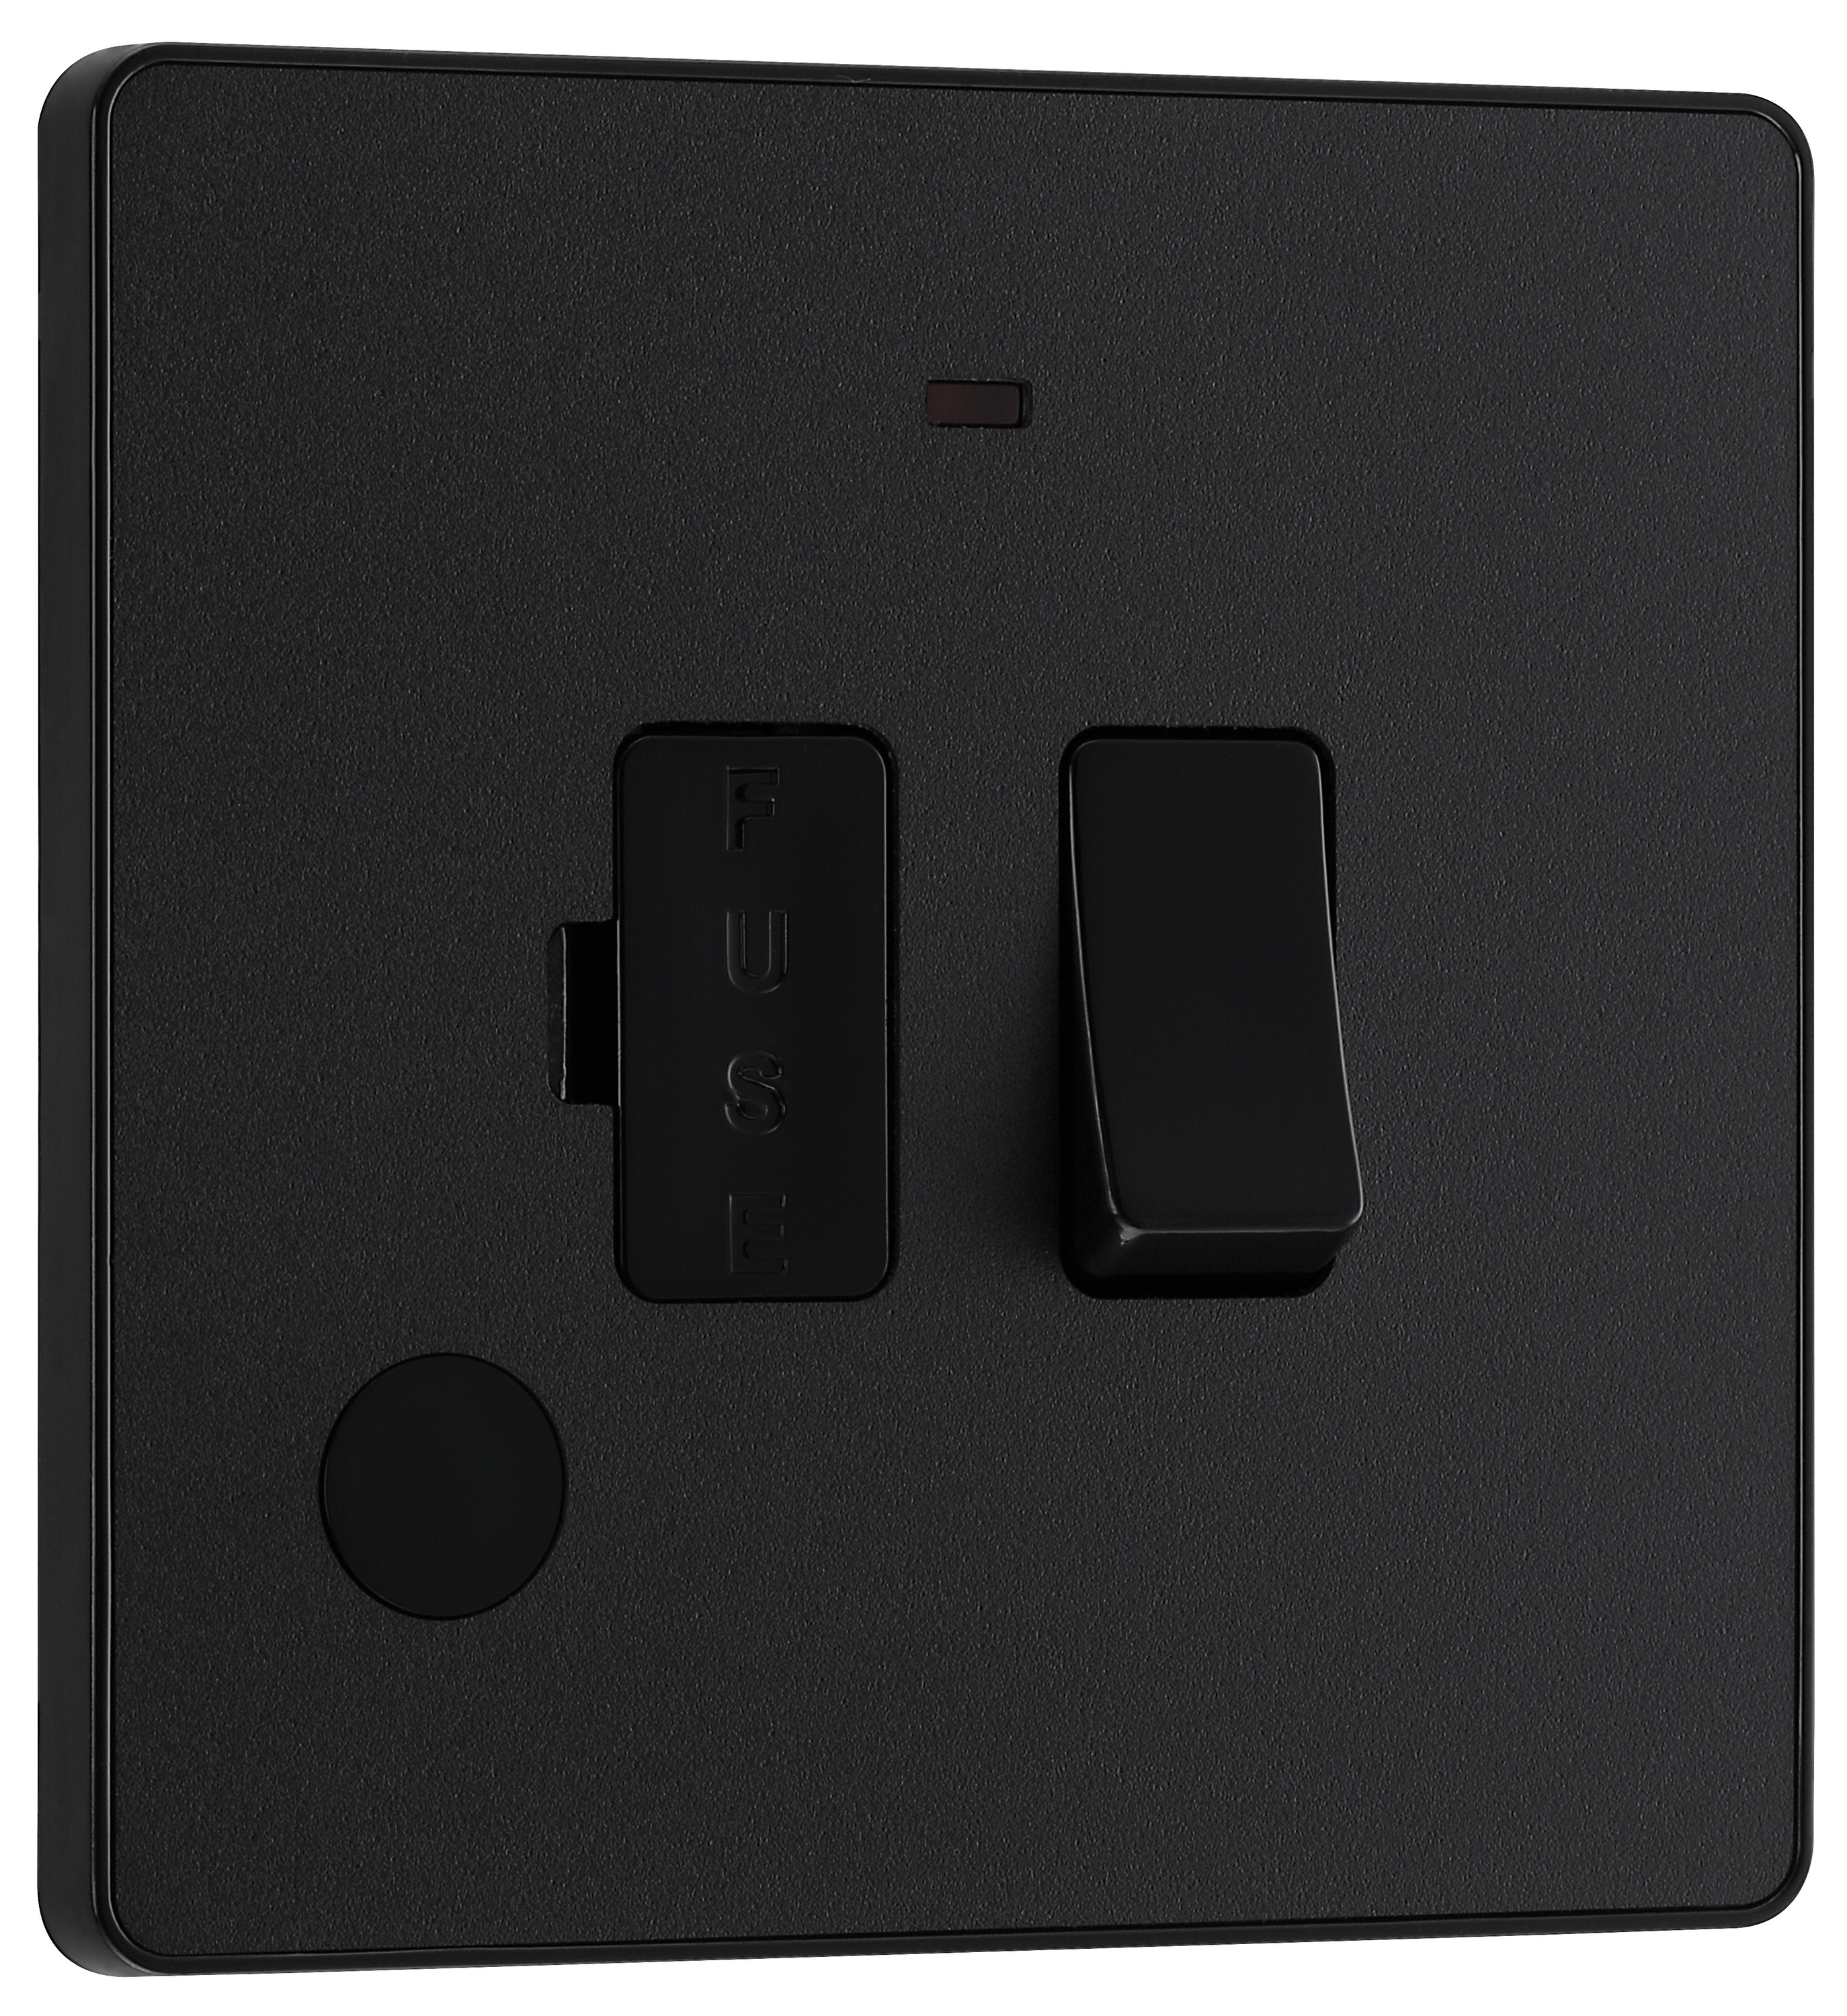 BG Evolve Matt Black 13A Switched Fused Connection Unit with Power Led Indicator & Flex Outlet